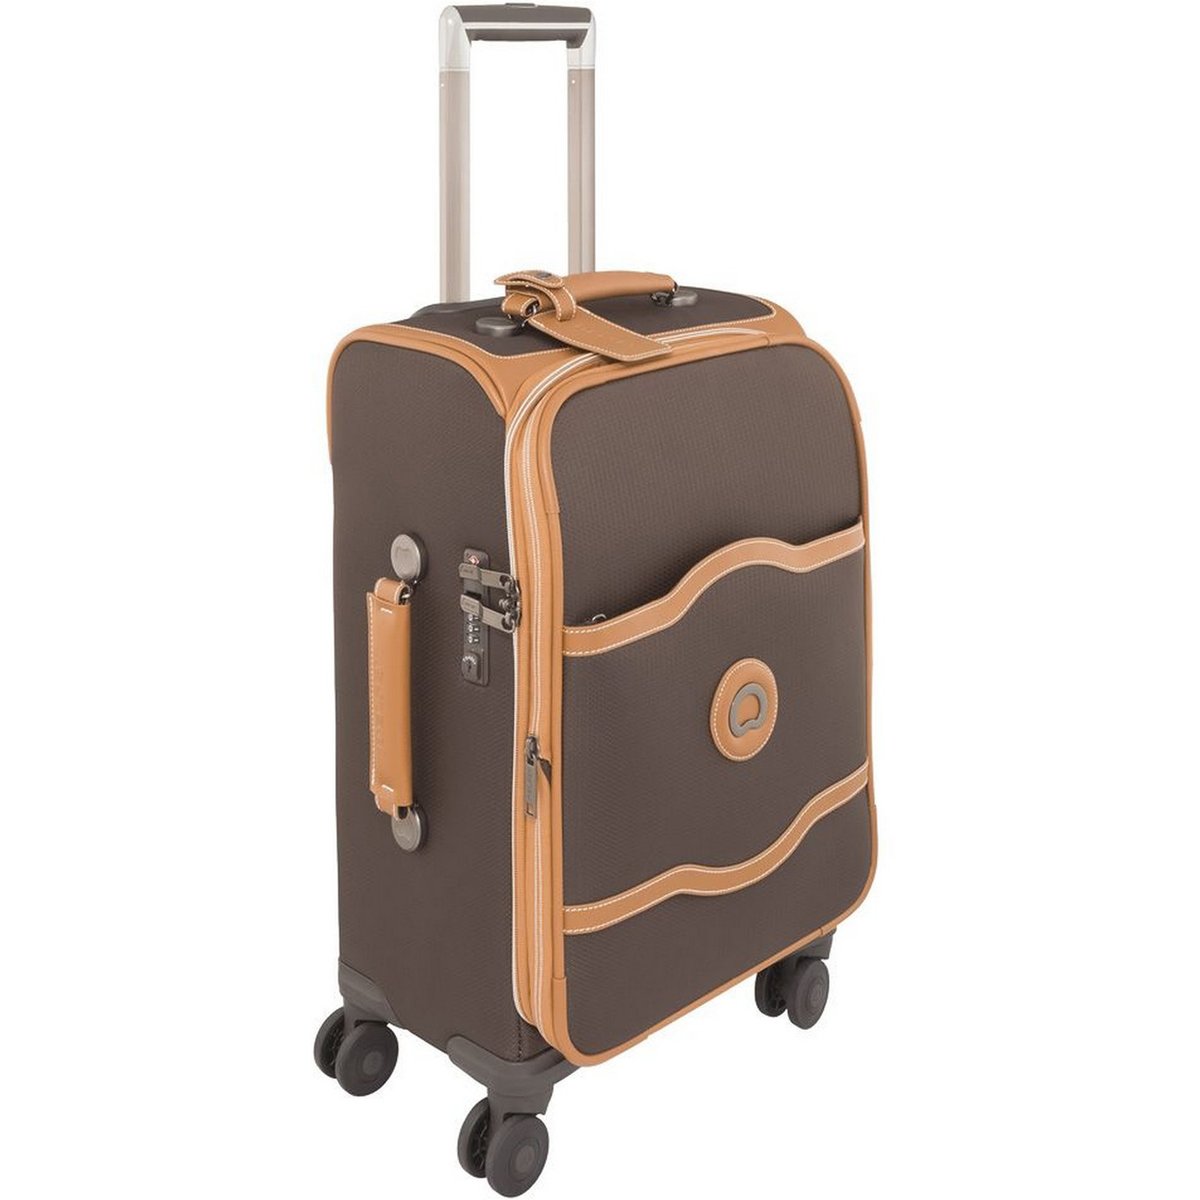 Delsey Chatelet 4Wheel Soft Trolley 82006 75cm Chocolate